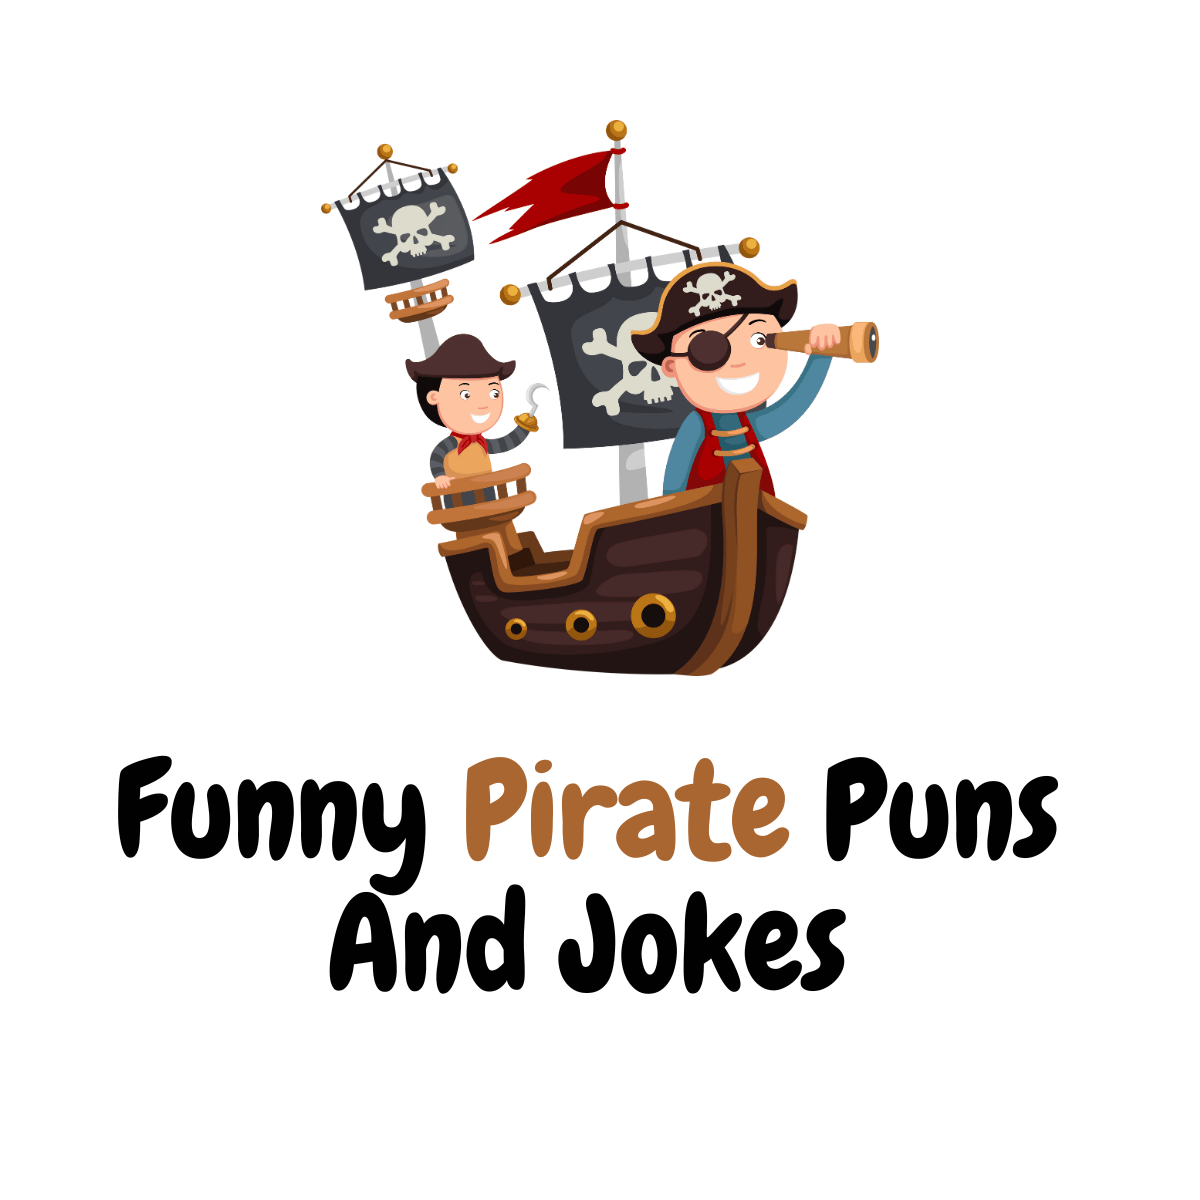 Funny Pirate Puns And Jokes